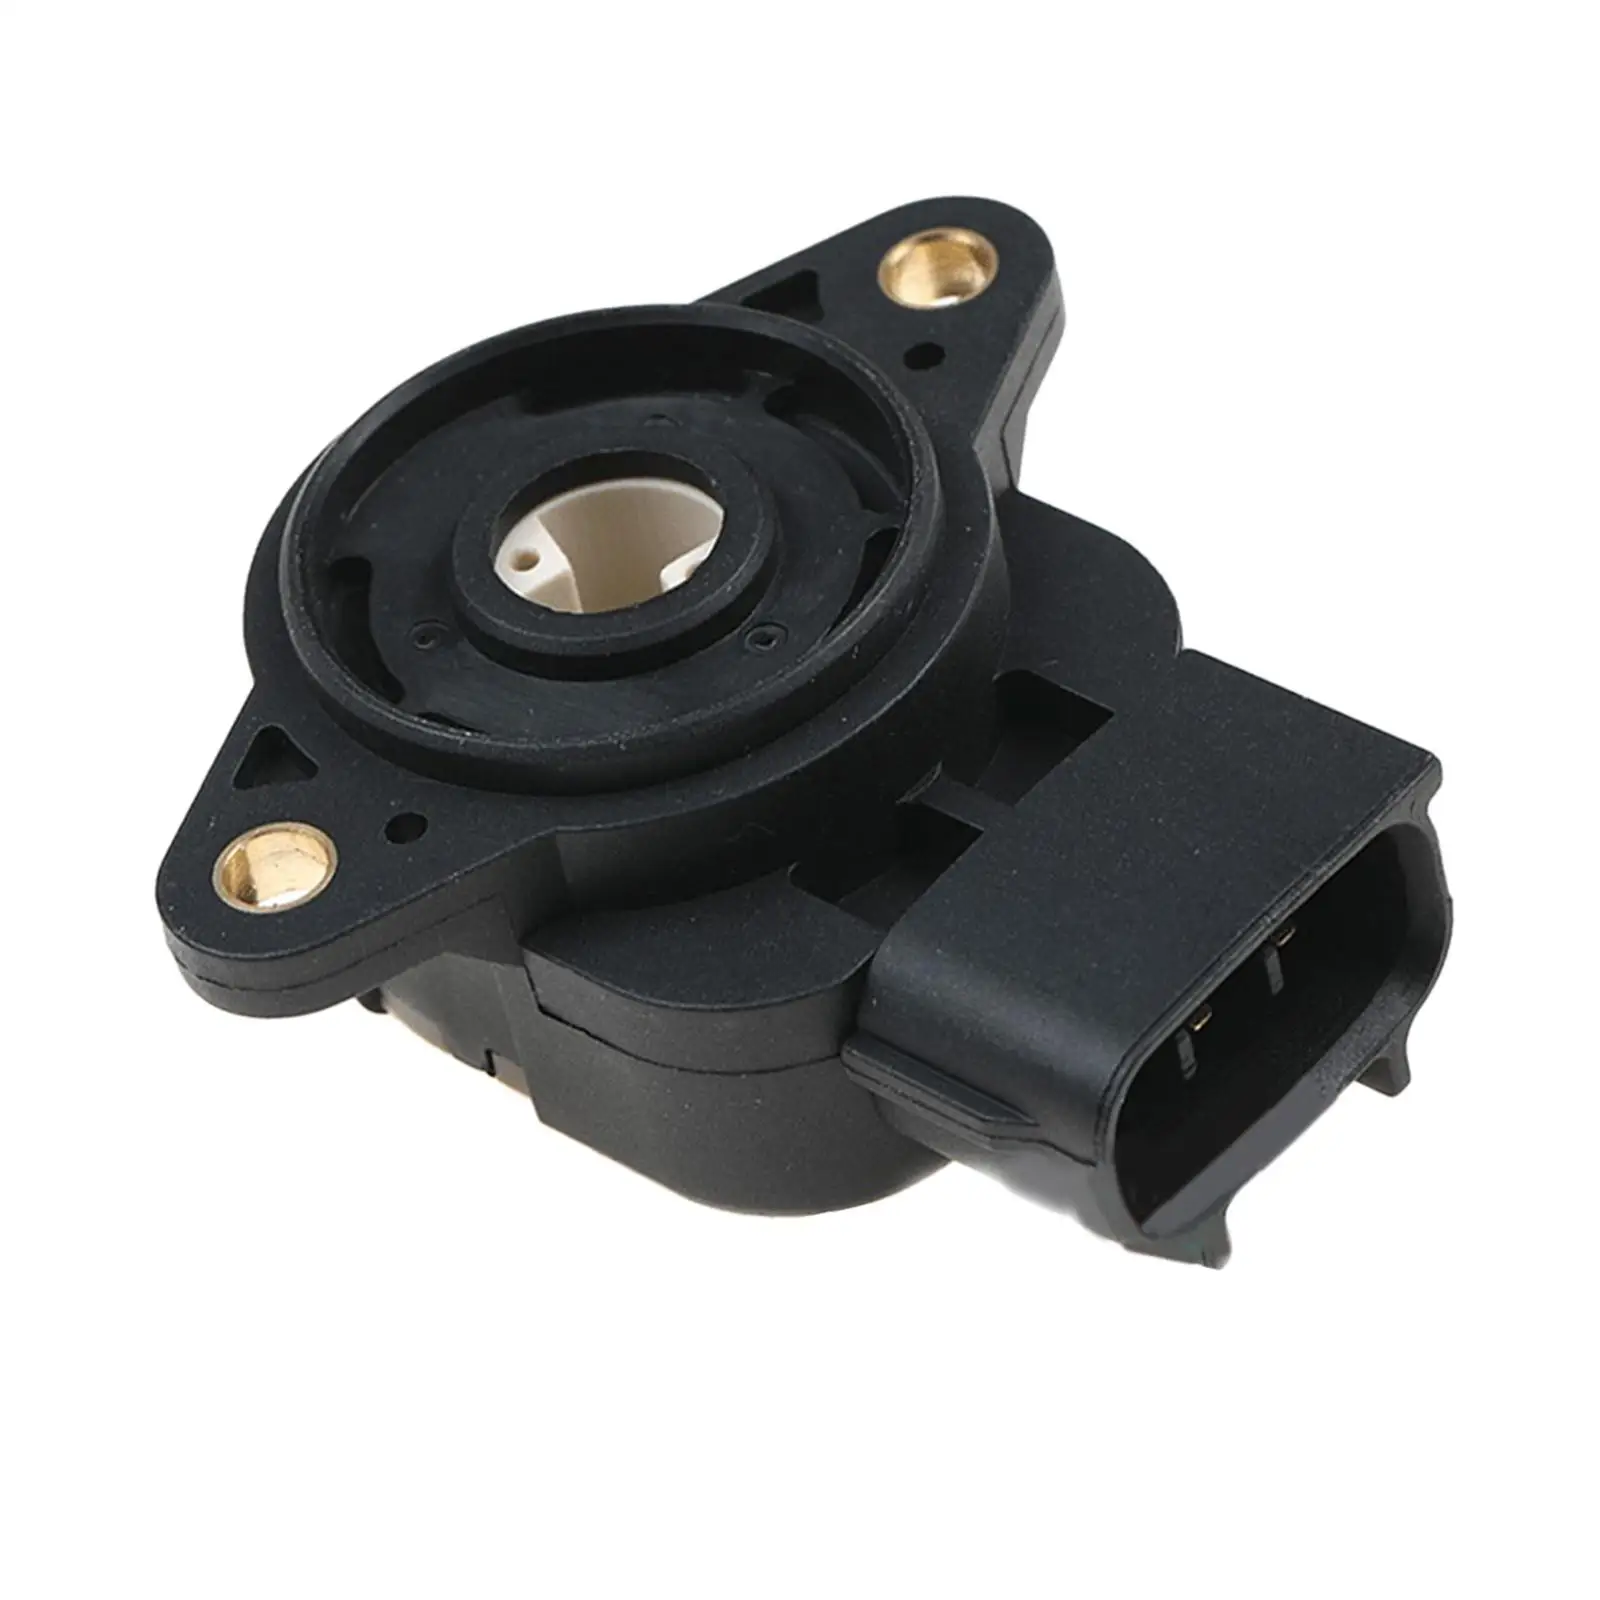 89452-20130 1985001071 8945220130 Throttle Position Sensor 198500-1071 for Replacement Kit Replacements Parts